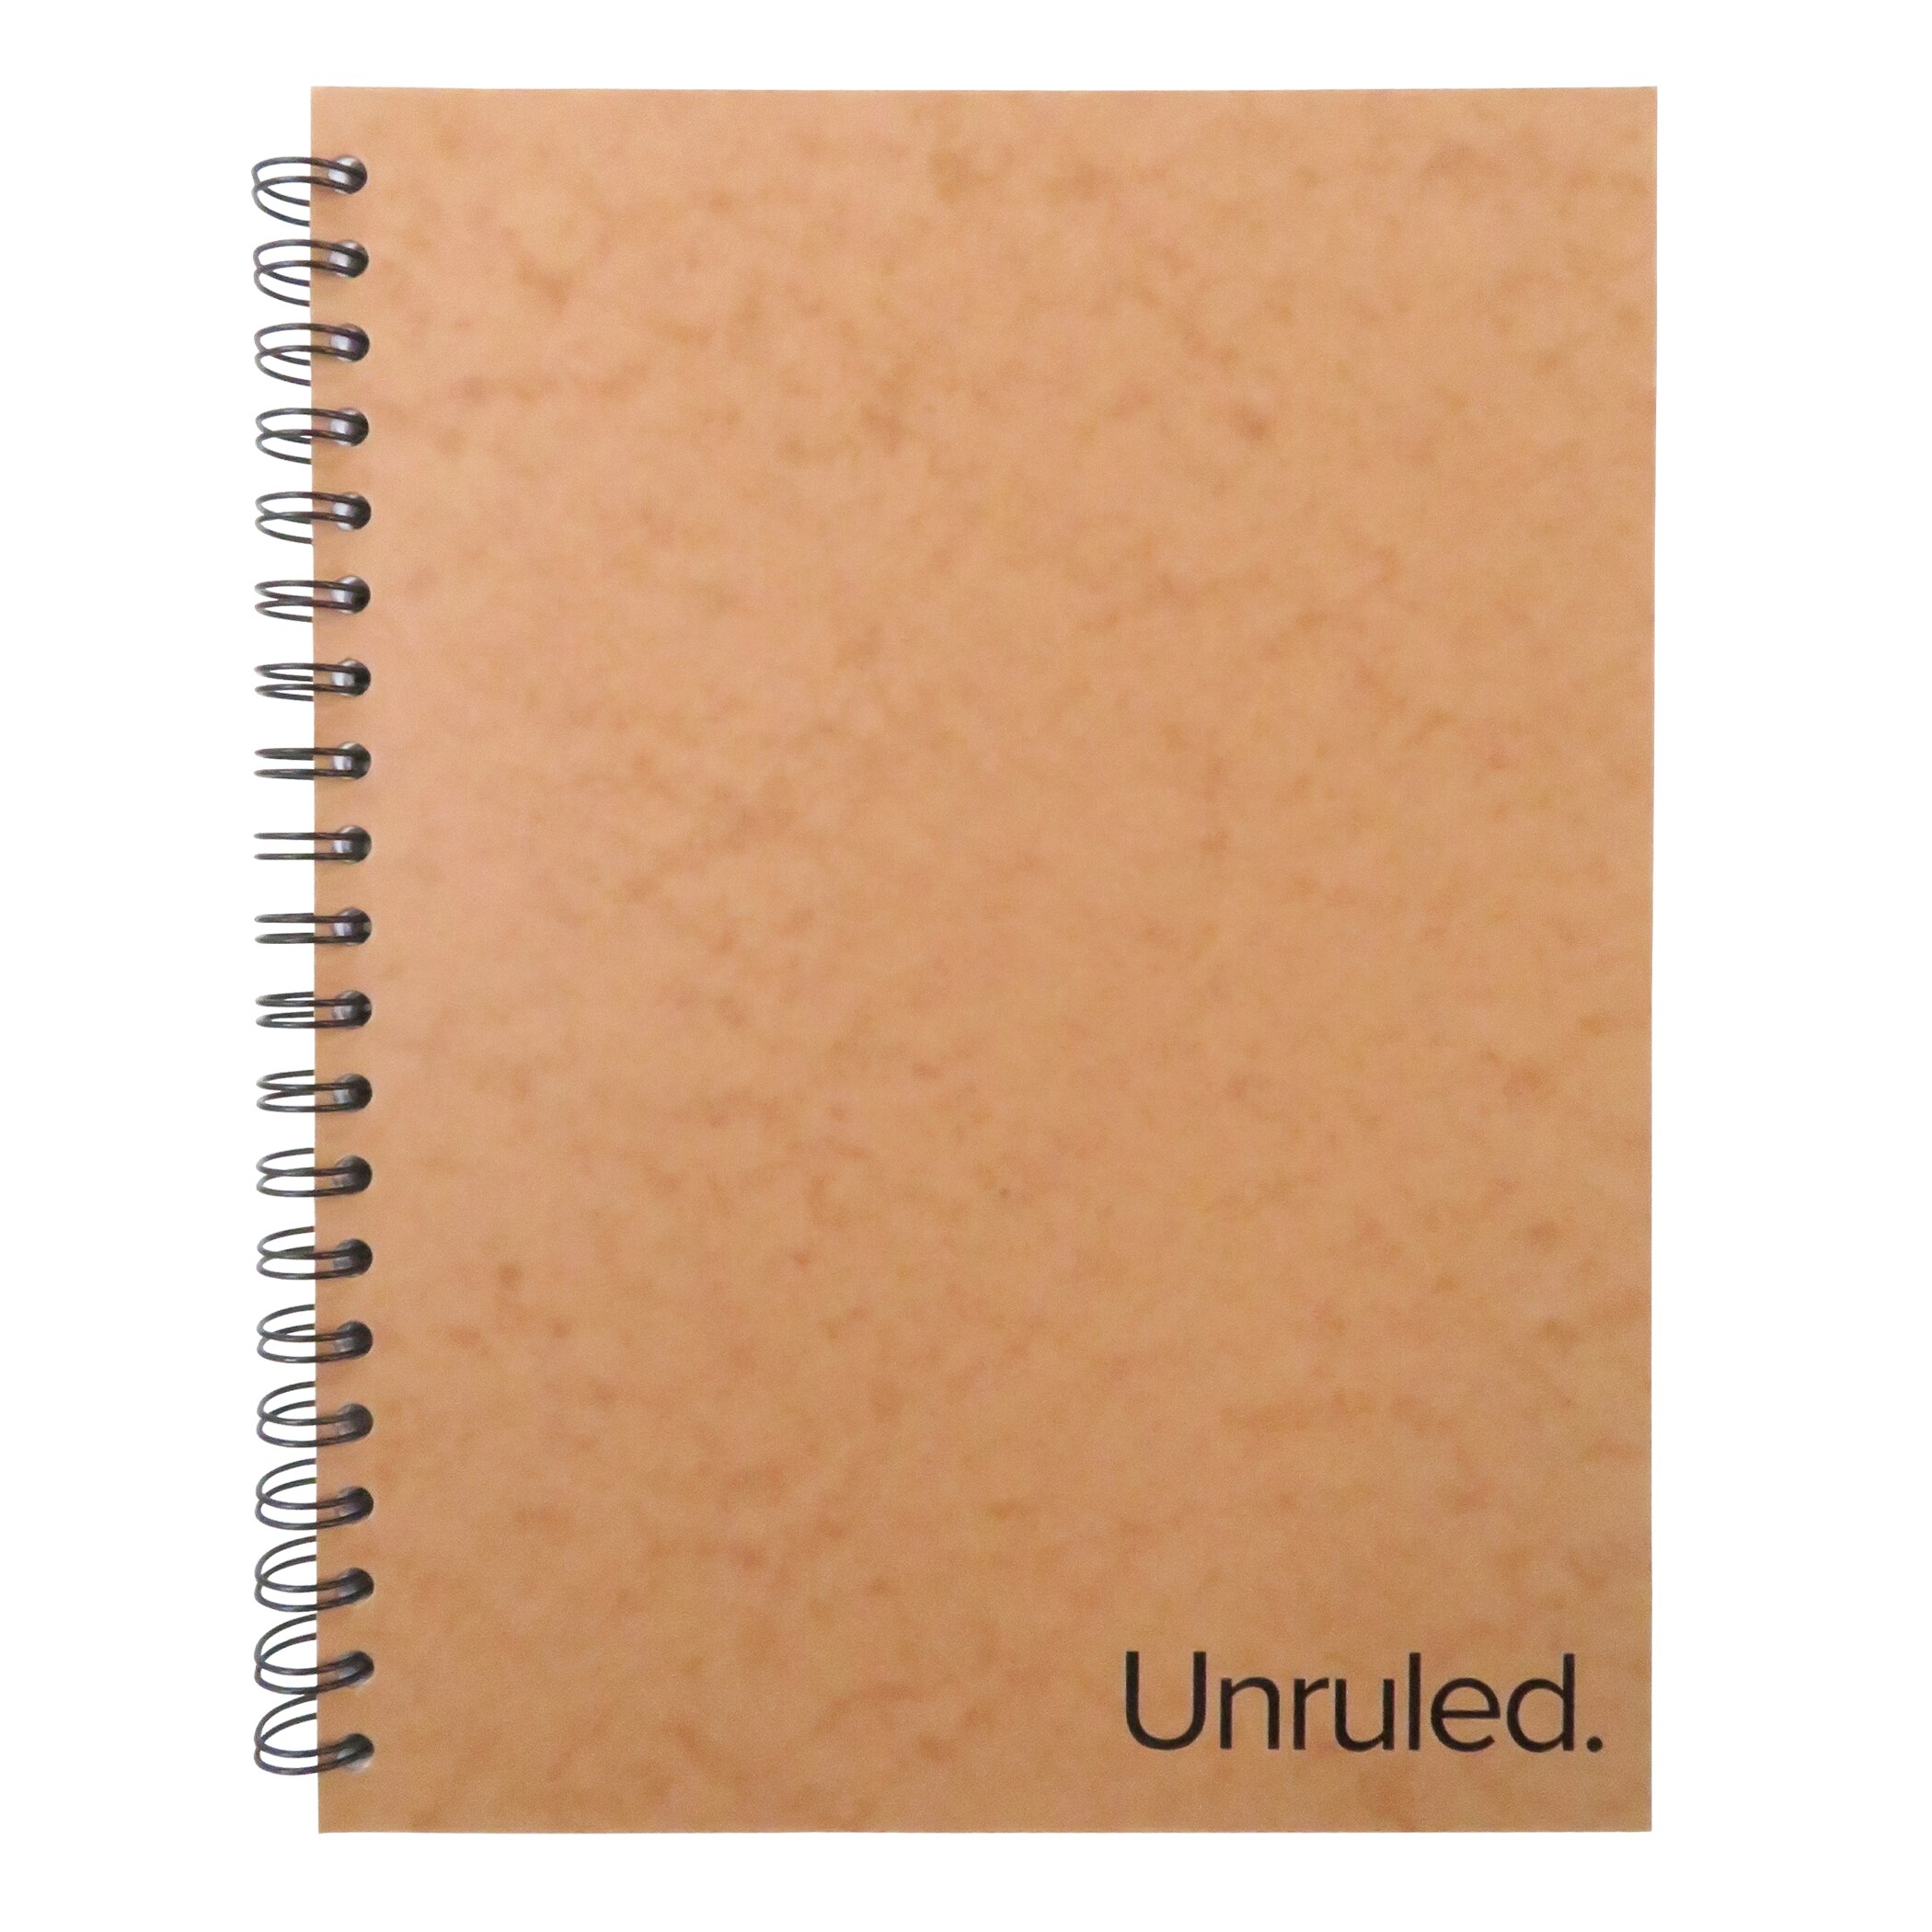 UNRULED CLASSIC NOTEBOOK, 70 WHITE UNRULED PAGES OF 60LB PAPER